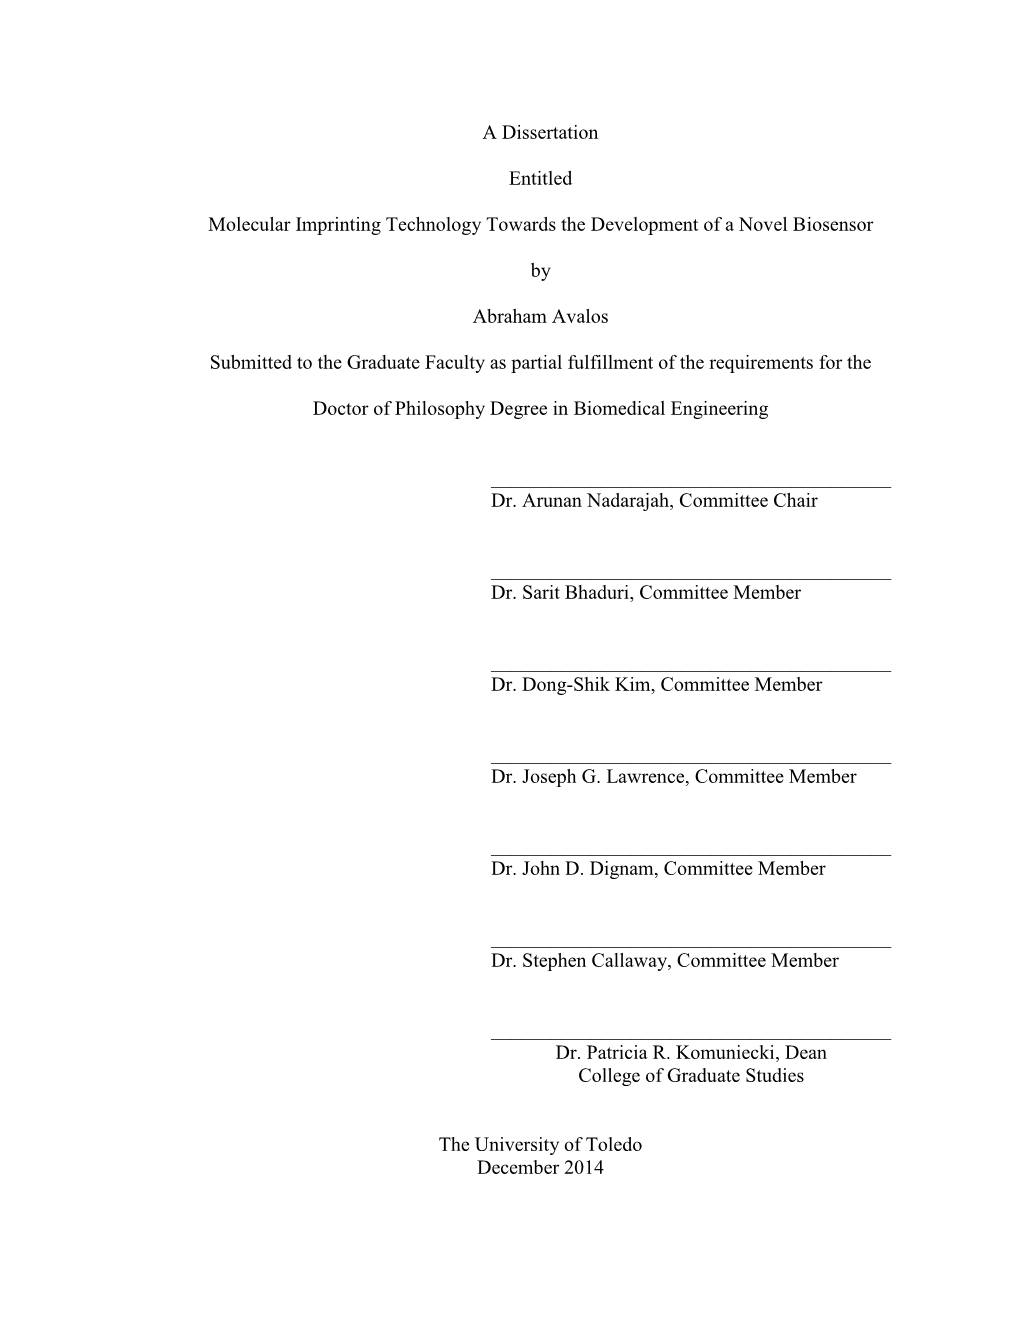 A Dissertation Entitled Molecular Imprinting Technology Towards the Development of a Novel Biosensor by Abraham Avalos Submitted